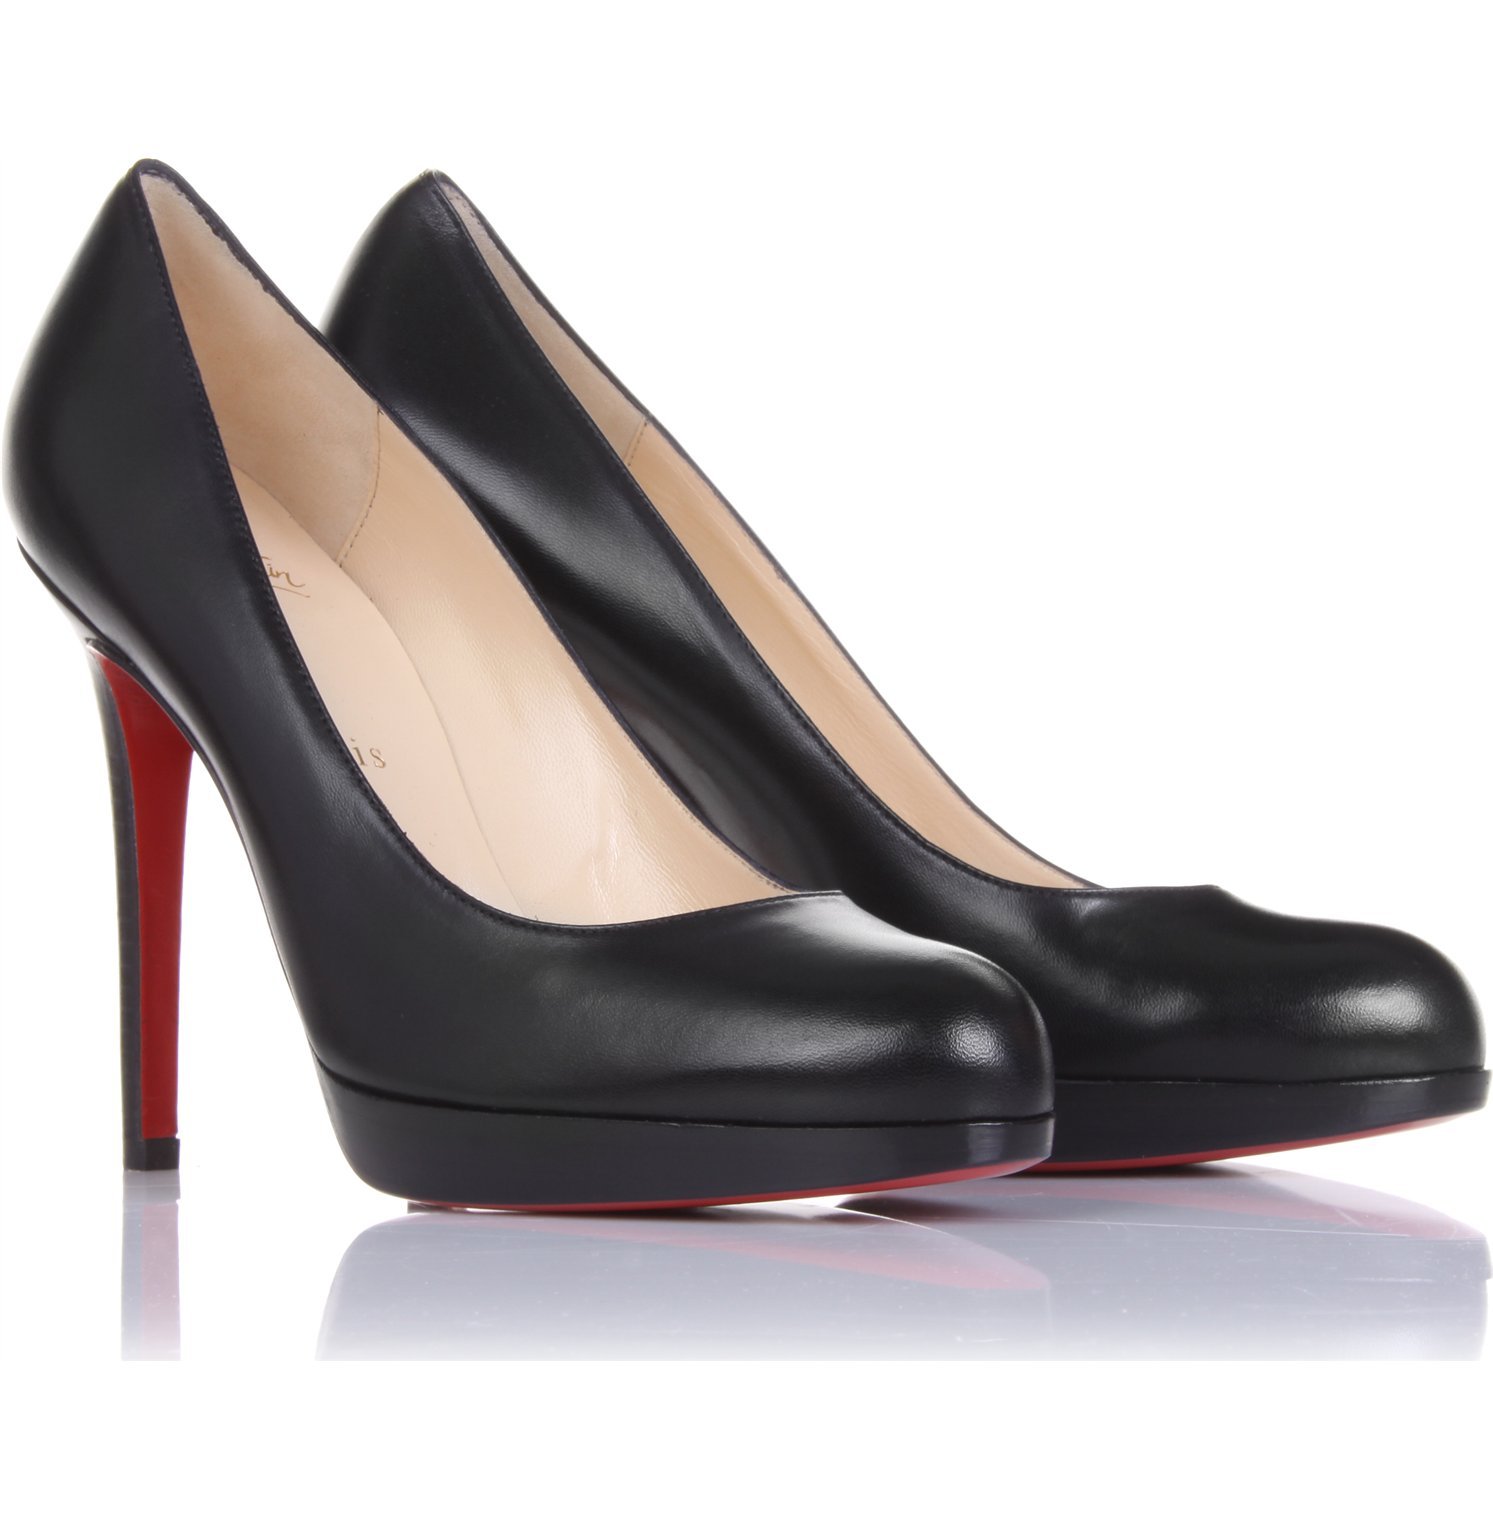 christian louboutin Simple pumps Black leather covered heels | The ...  